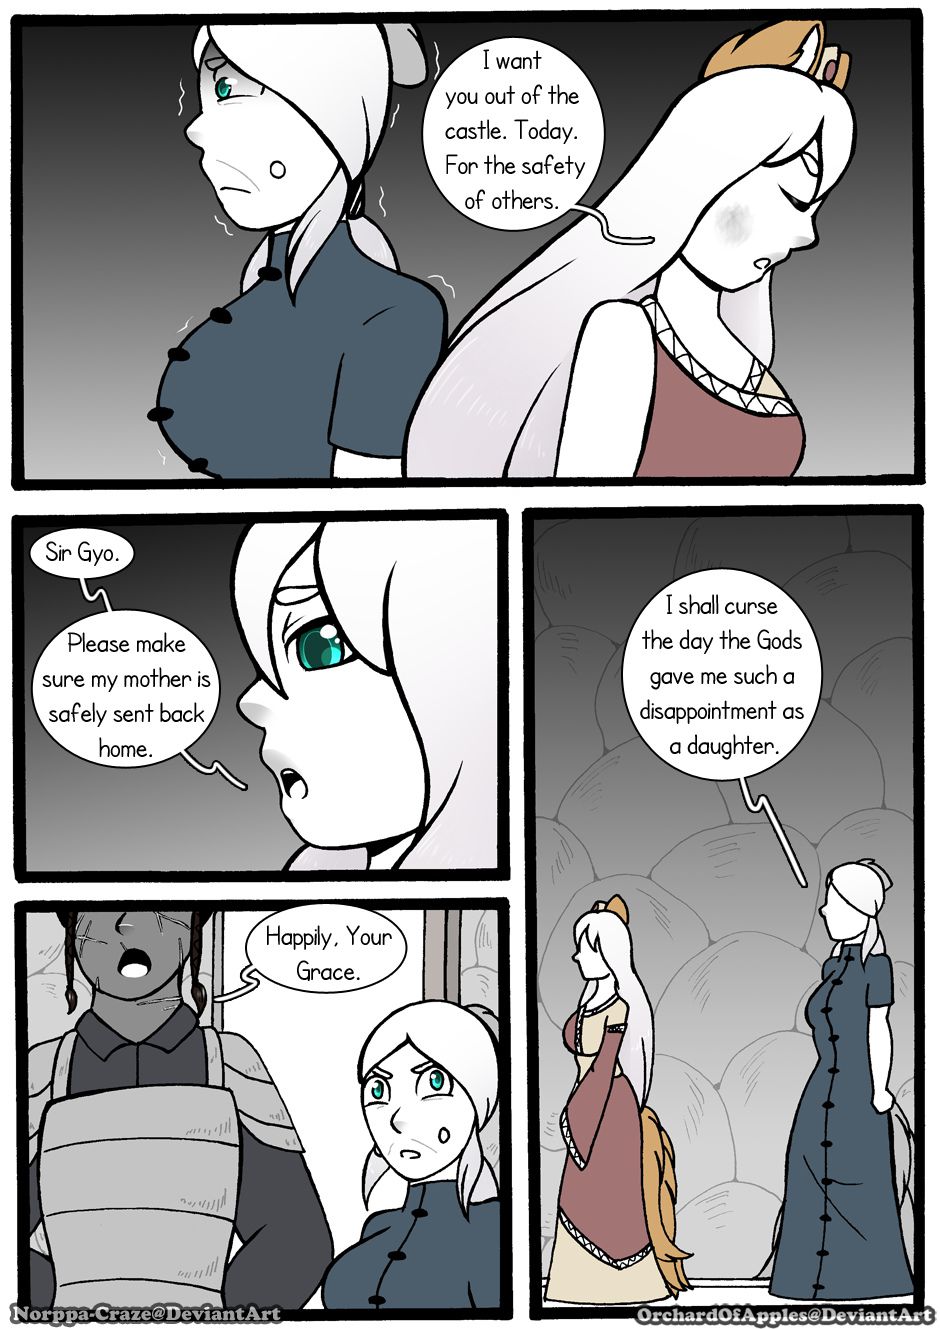 [Jeny-jen94] Between Kings and Queens [Ongoing] 285